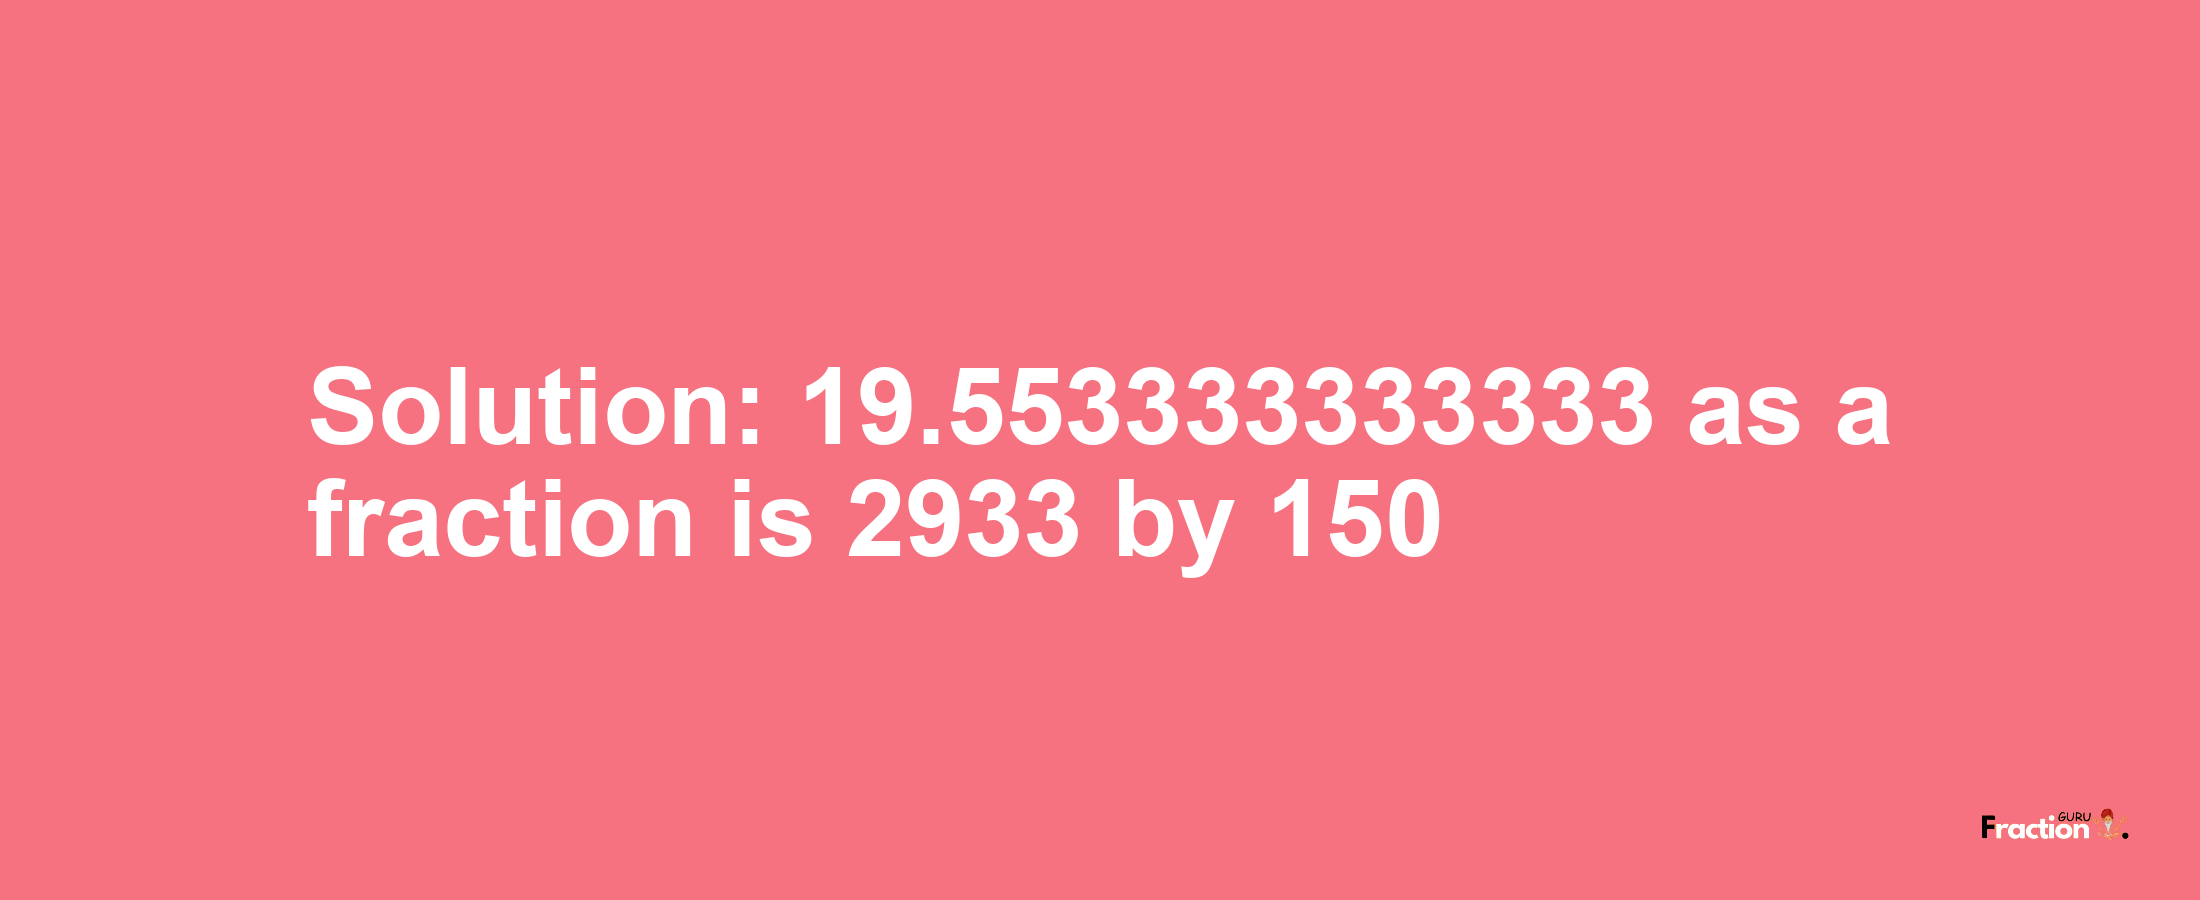 Solution:19.553333333333 as a fraction is 2933/150